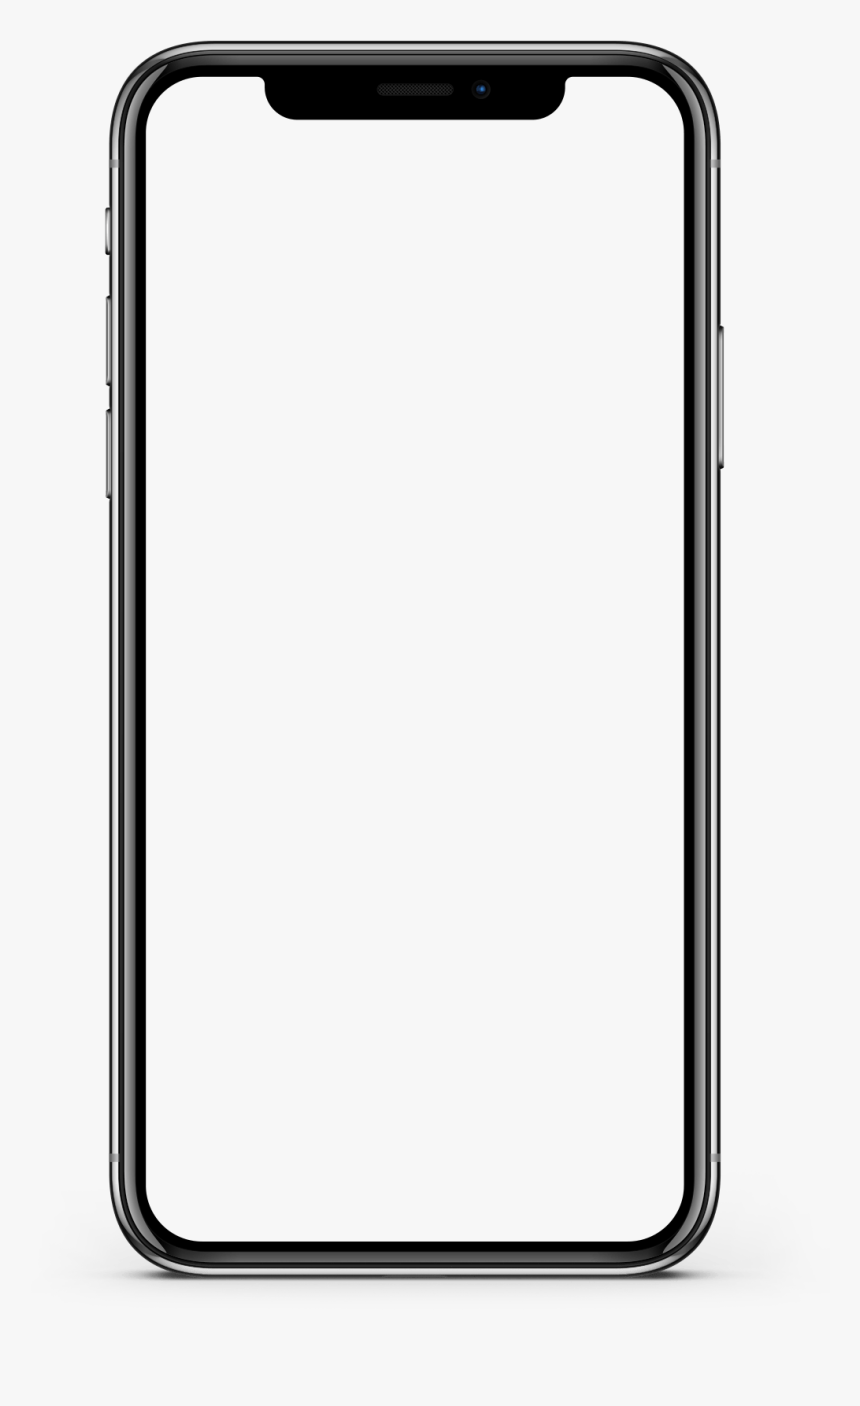 Iphone X Screen Mockup - Transparent Background Iphone Png